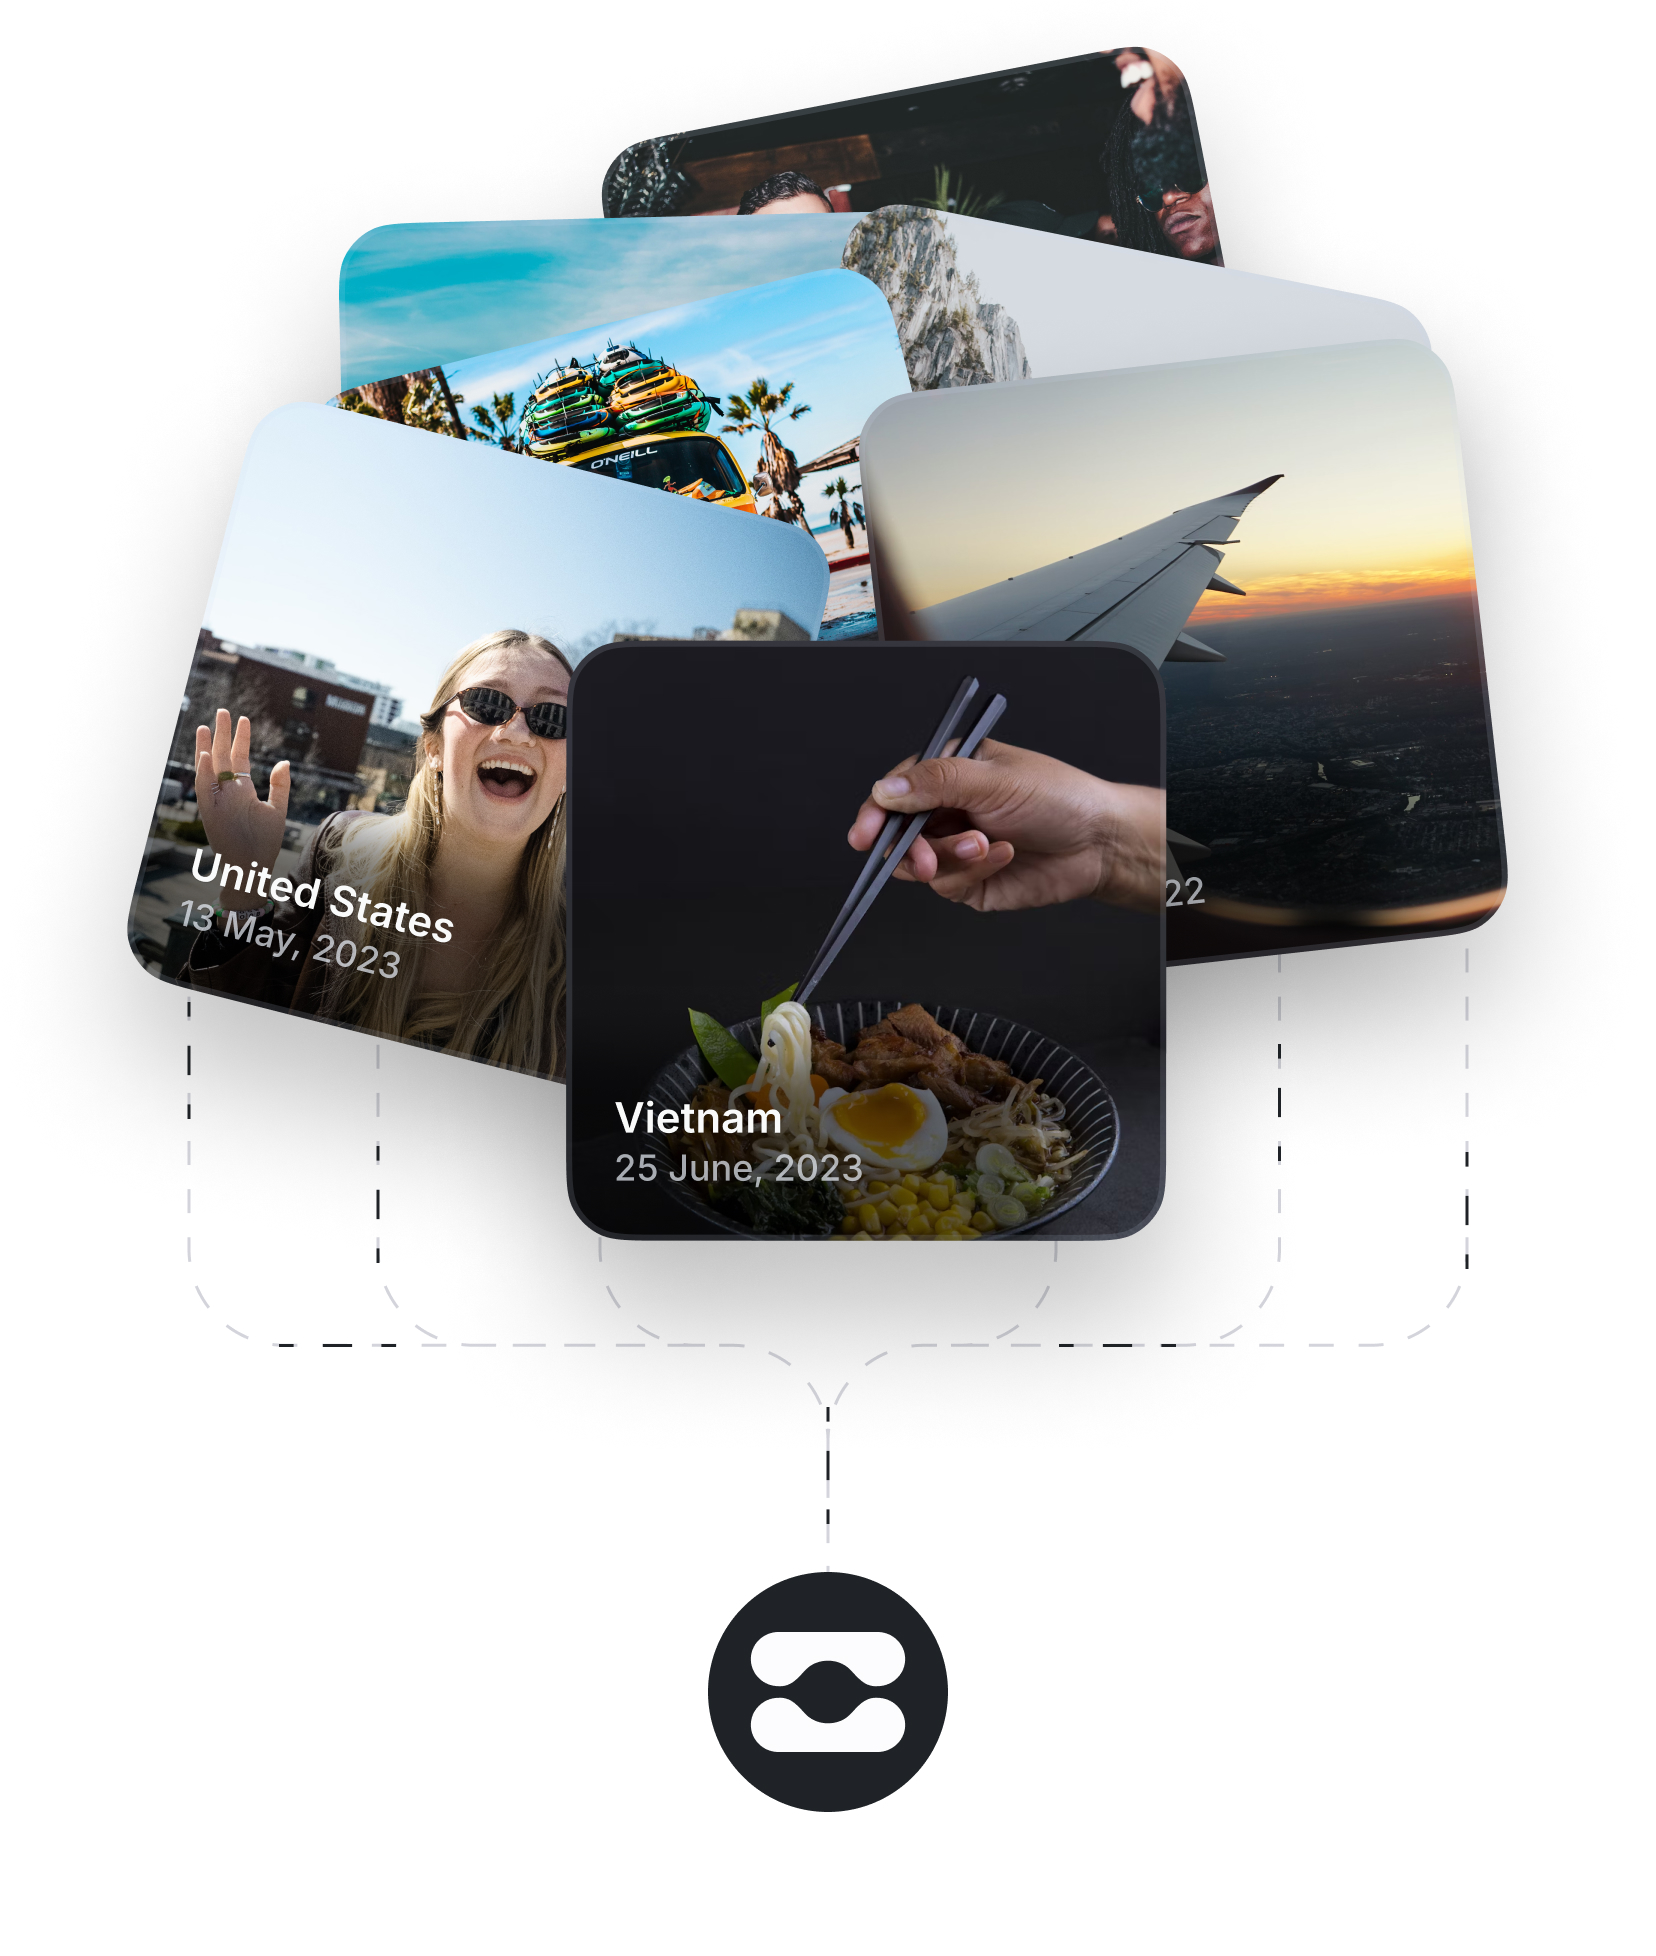 Multiple photo cards are connected to Citizen Remote